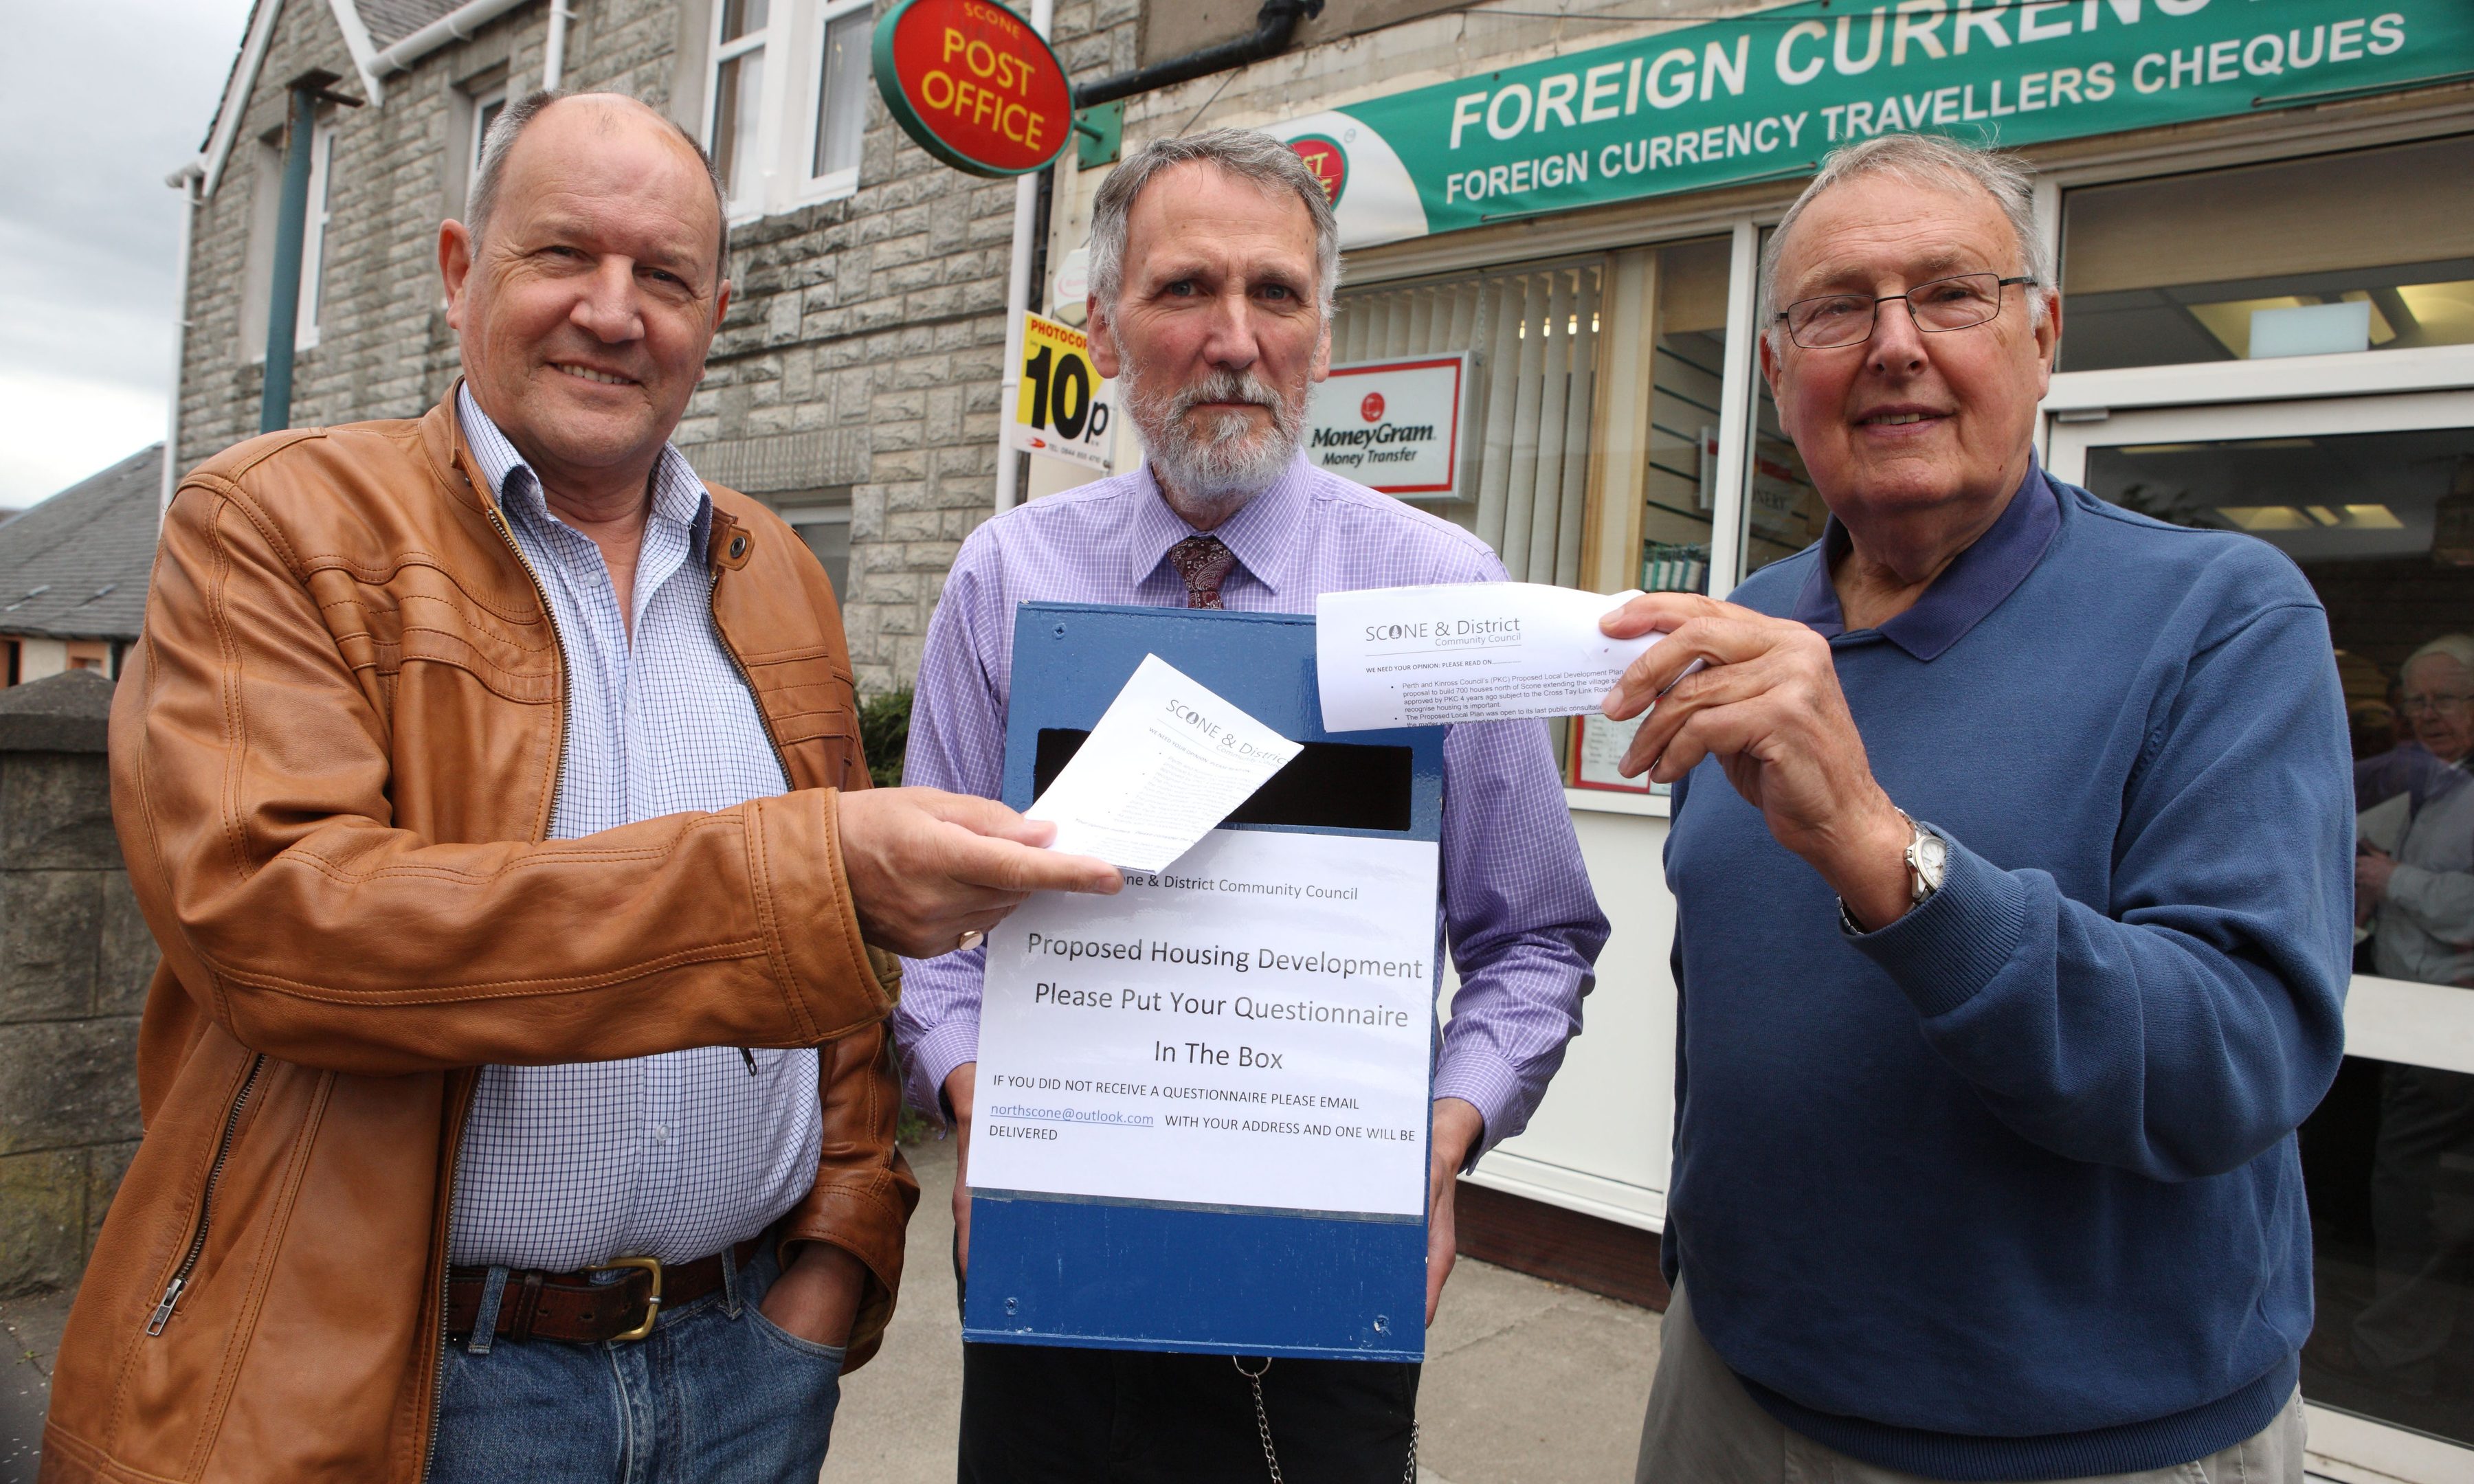 Martin Rhodes,Scone Study Group, Councillor Lewis Simpson and David Dykes, Scone and District Community Council, at Scone Post office